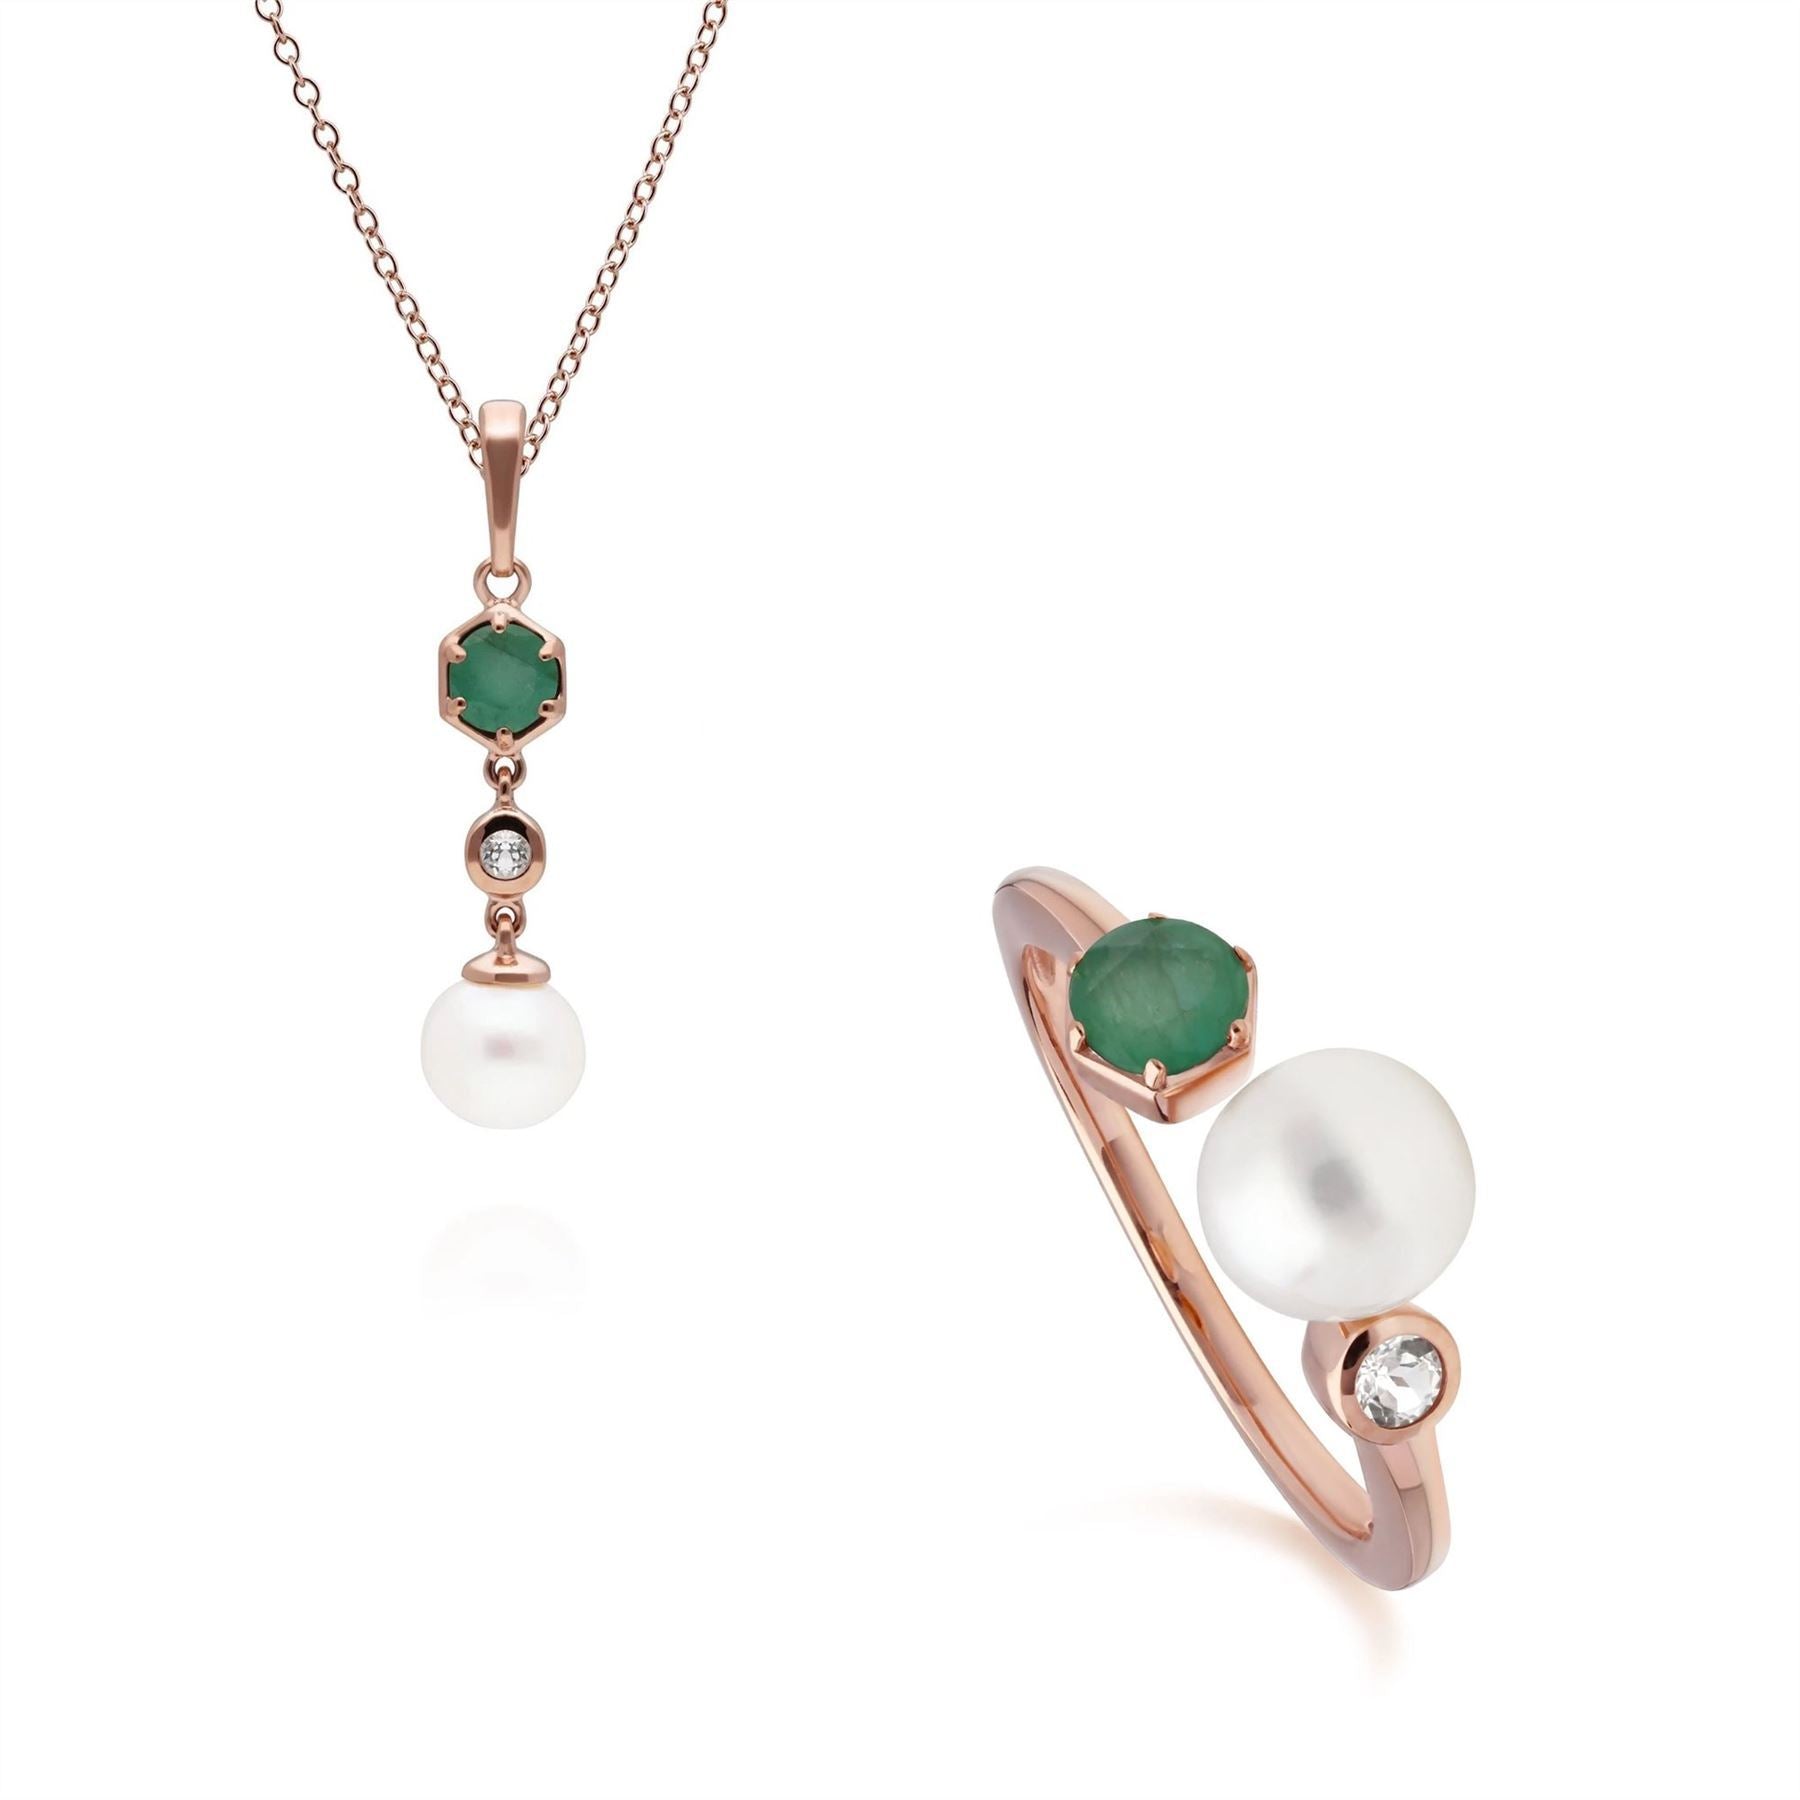 Modern Pearl, Emerald & Topaz Pendant & Ring Set in Rose Gold Plated Sterling Silver